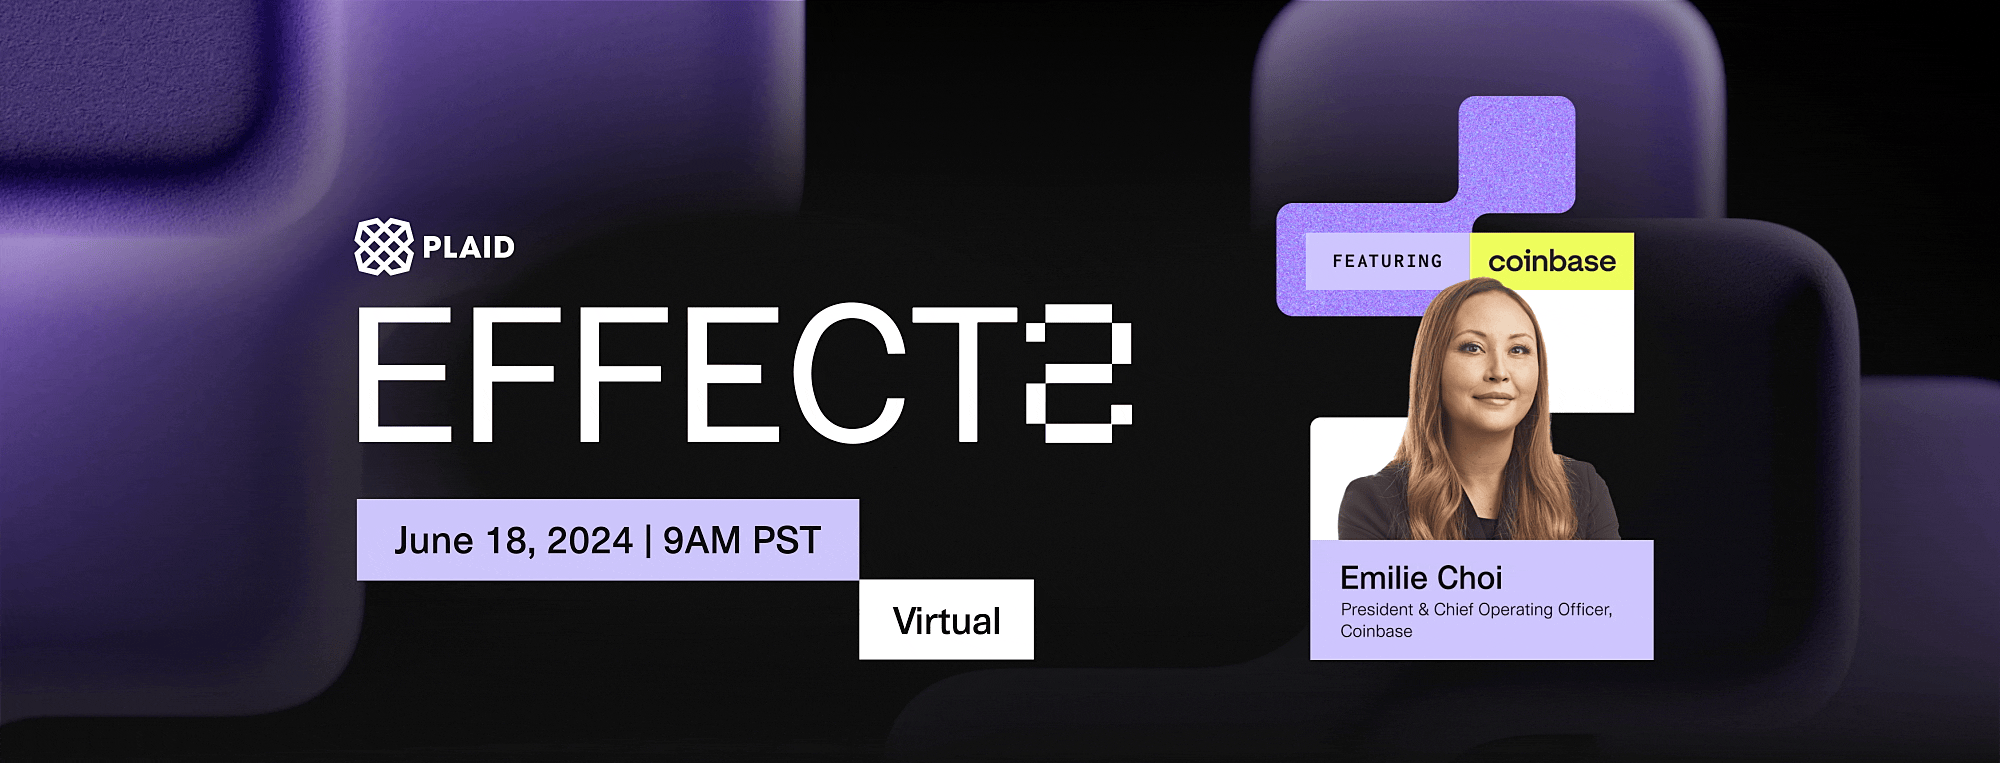 Effects 2024 logo - Plaid Effects 2024 virtual event - 06-18-2024 09:00a PST